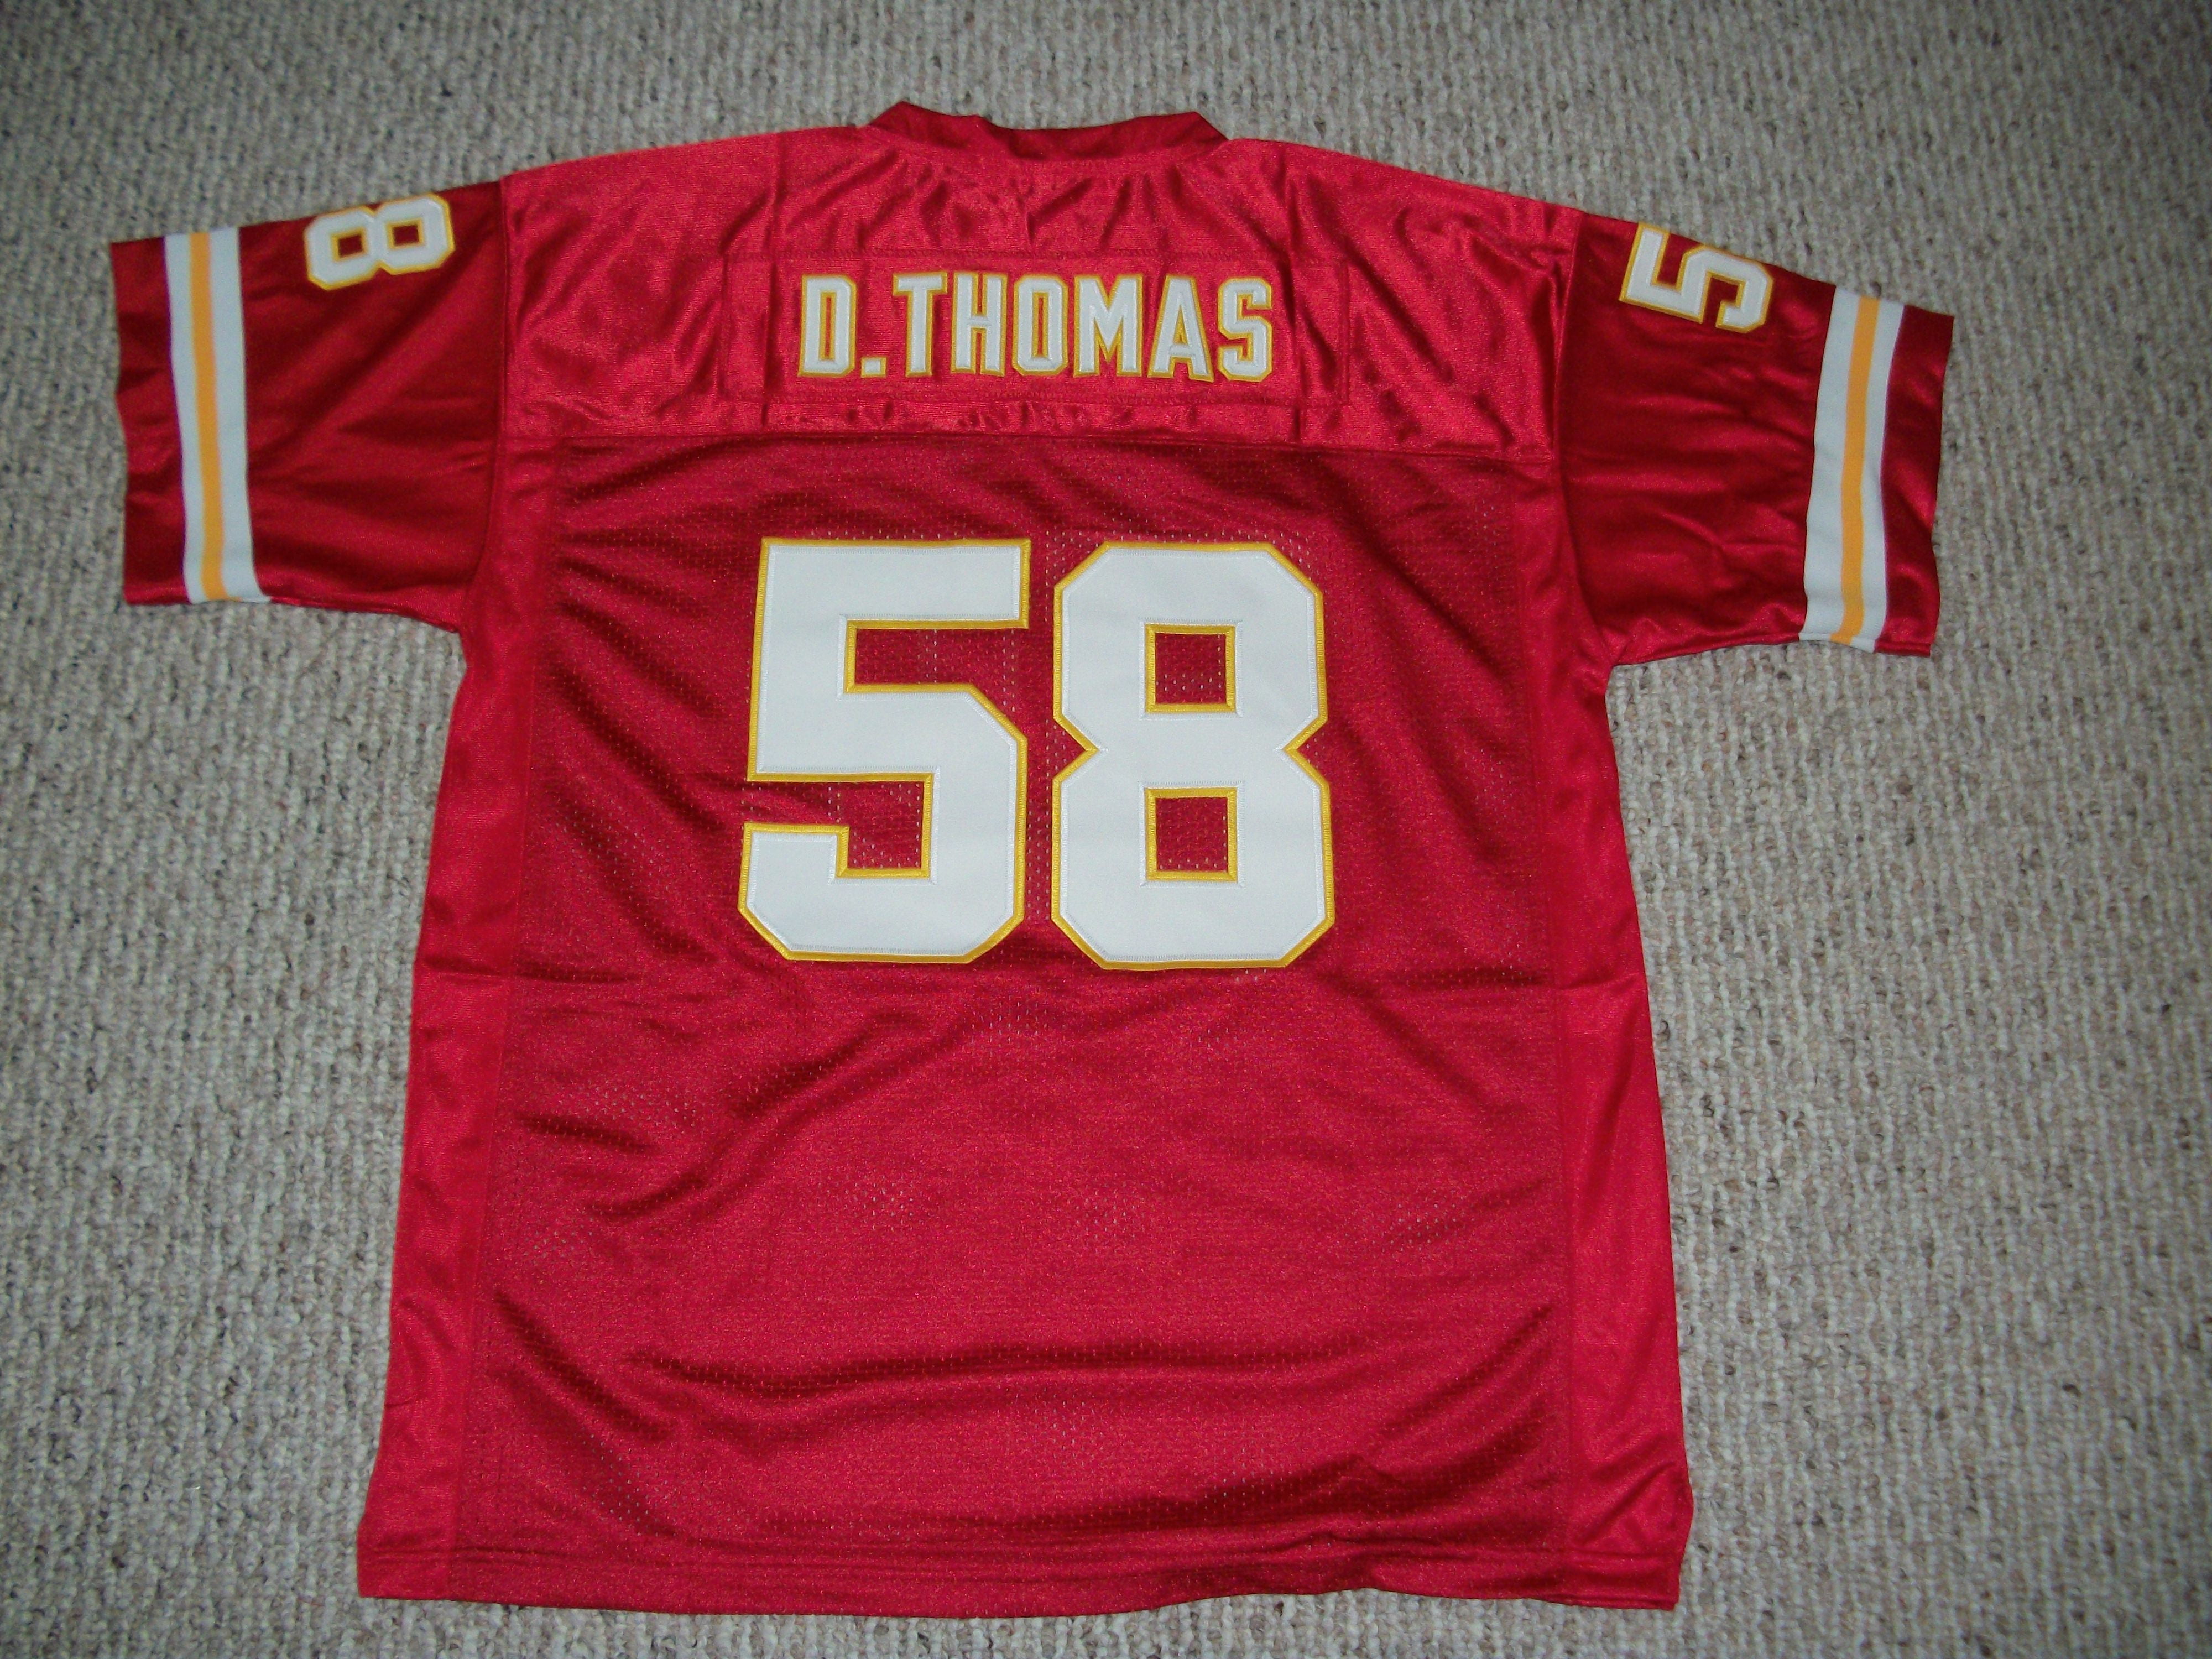 Derrick Thomas AFC Mitchell & Ness 1995 Pro Bowl Authentic Jersey -  White/Red